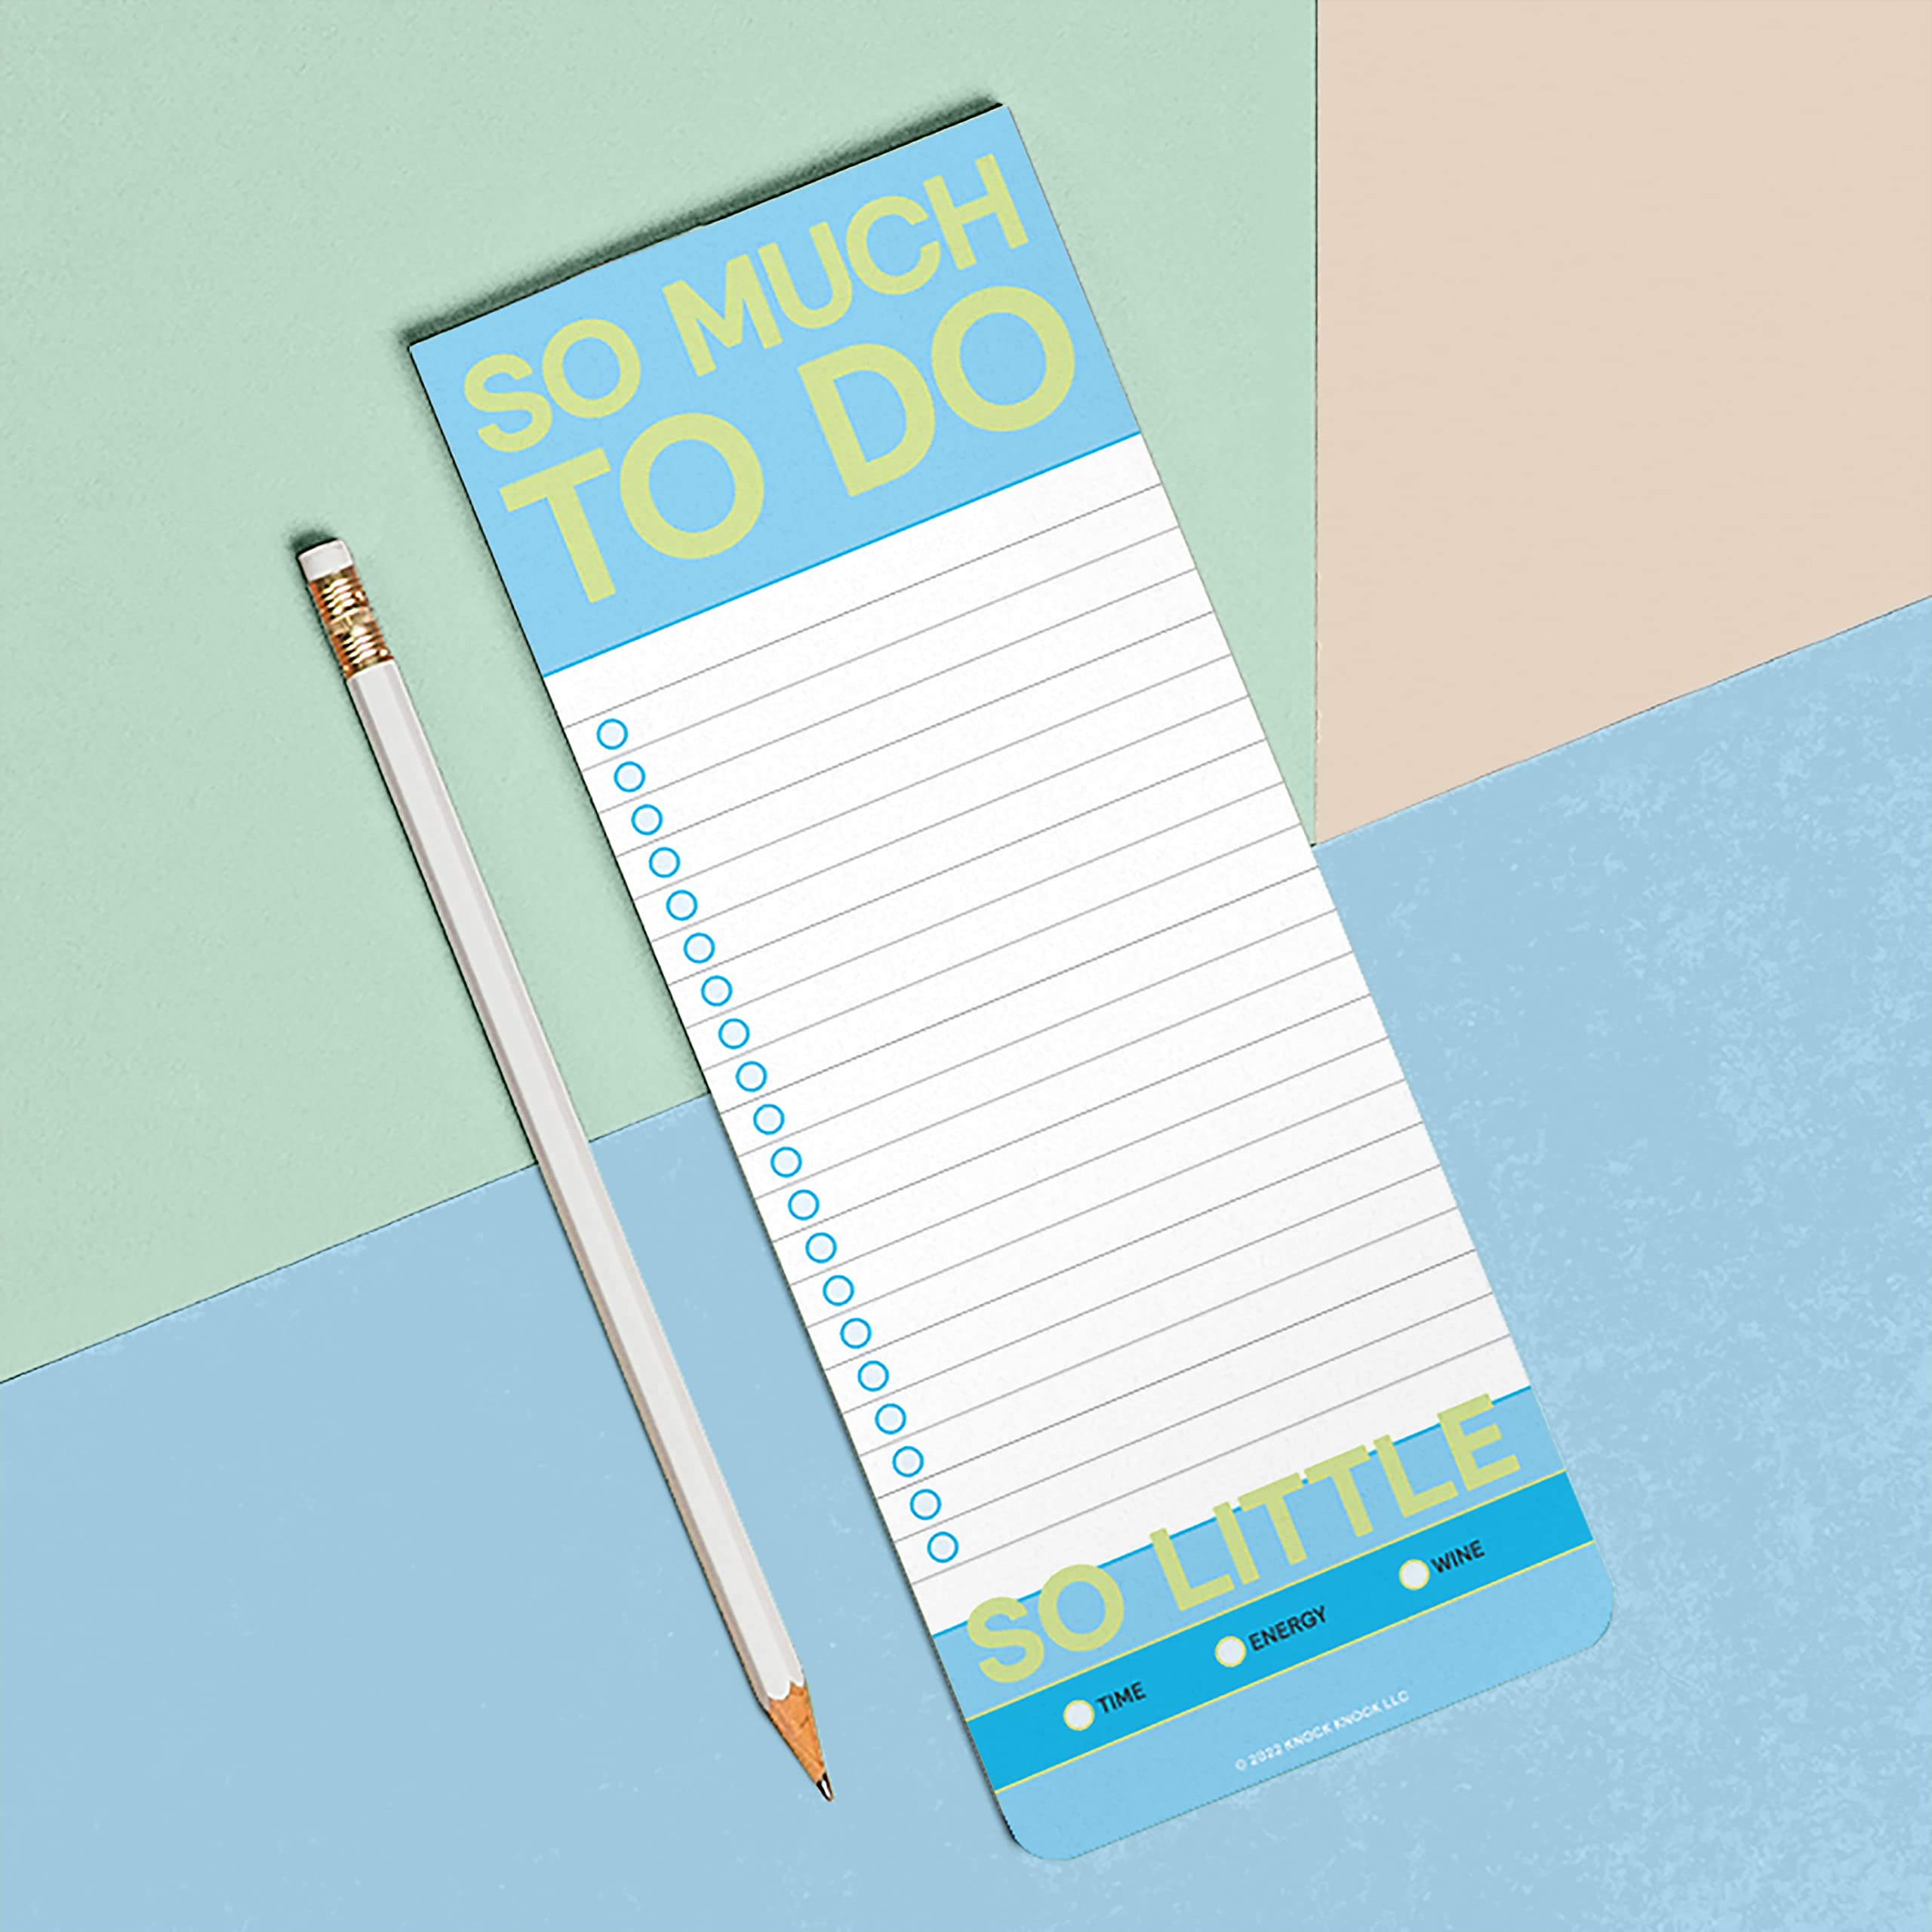 So Much to Do Make-a-List Pad